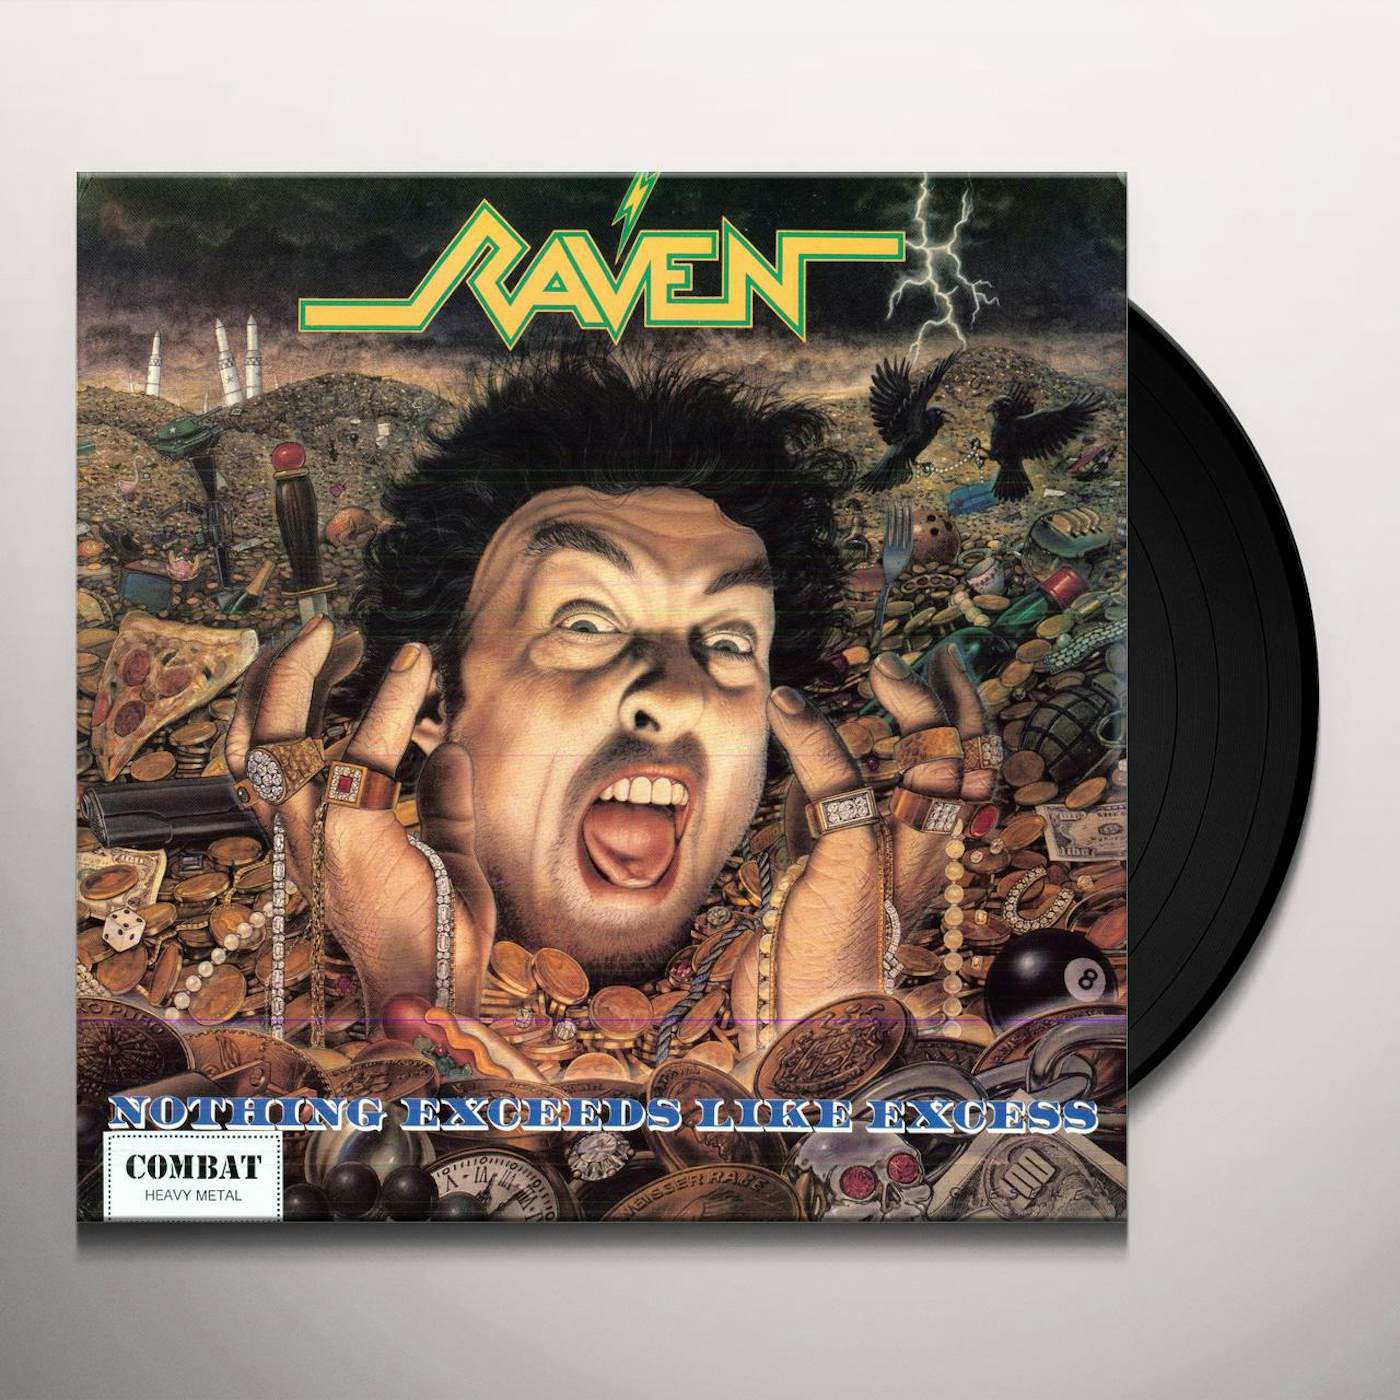 Raven Nothing Exceeds Like Excess Vinyl Record